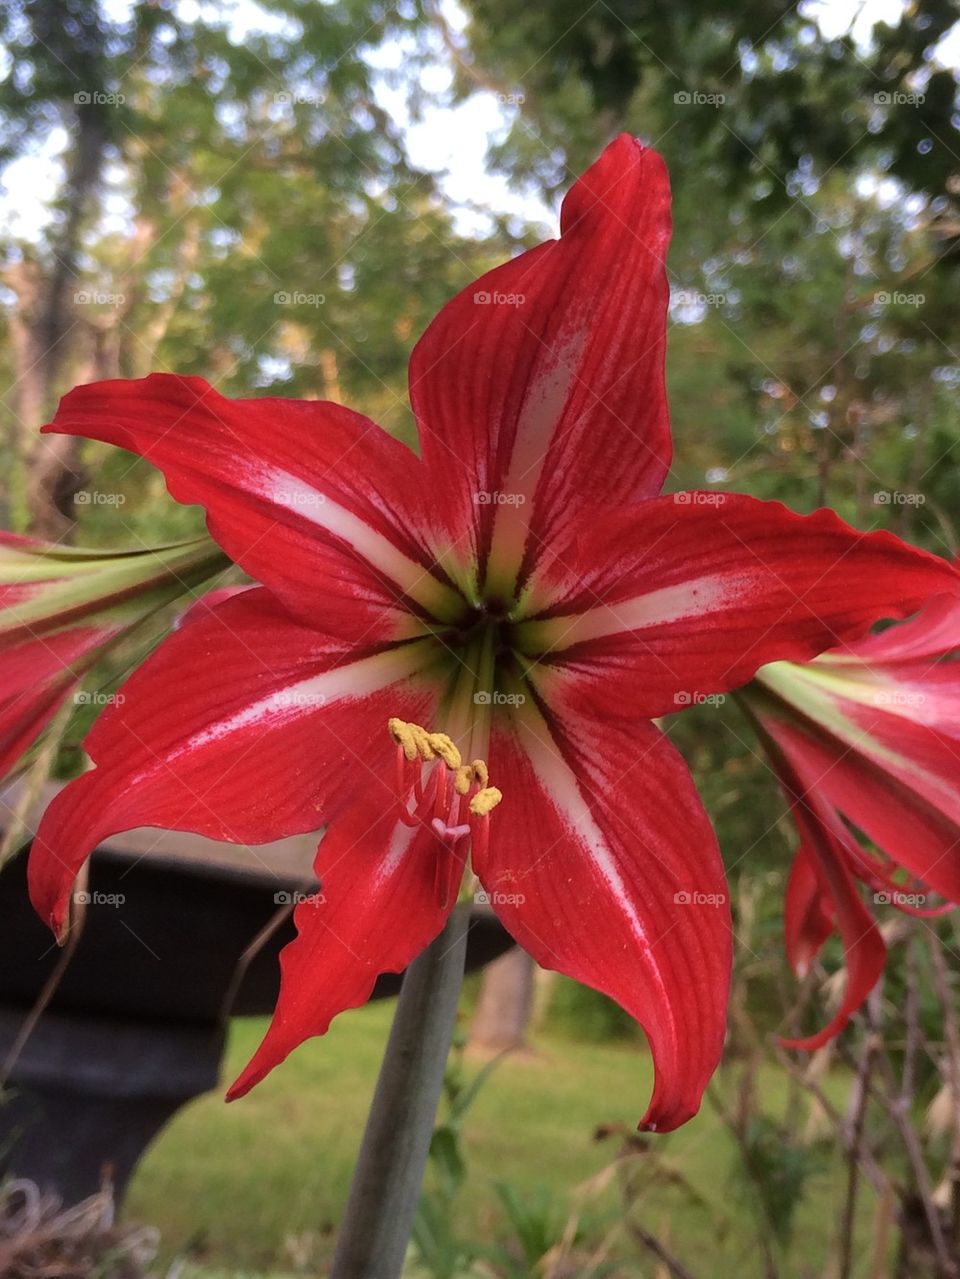 Red and white Lily